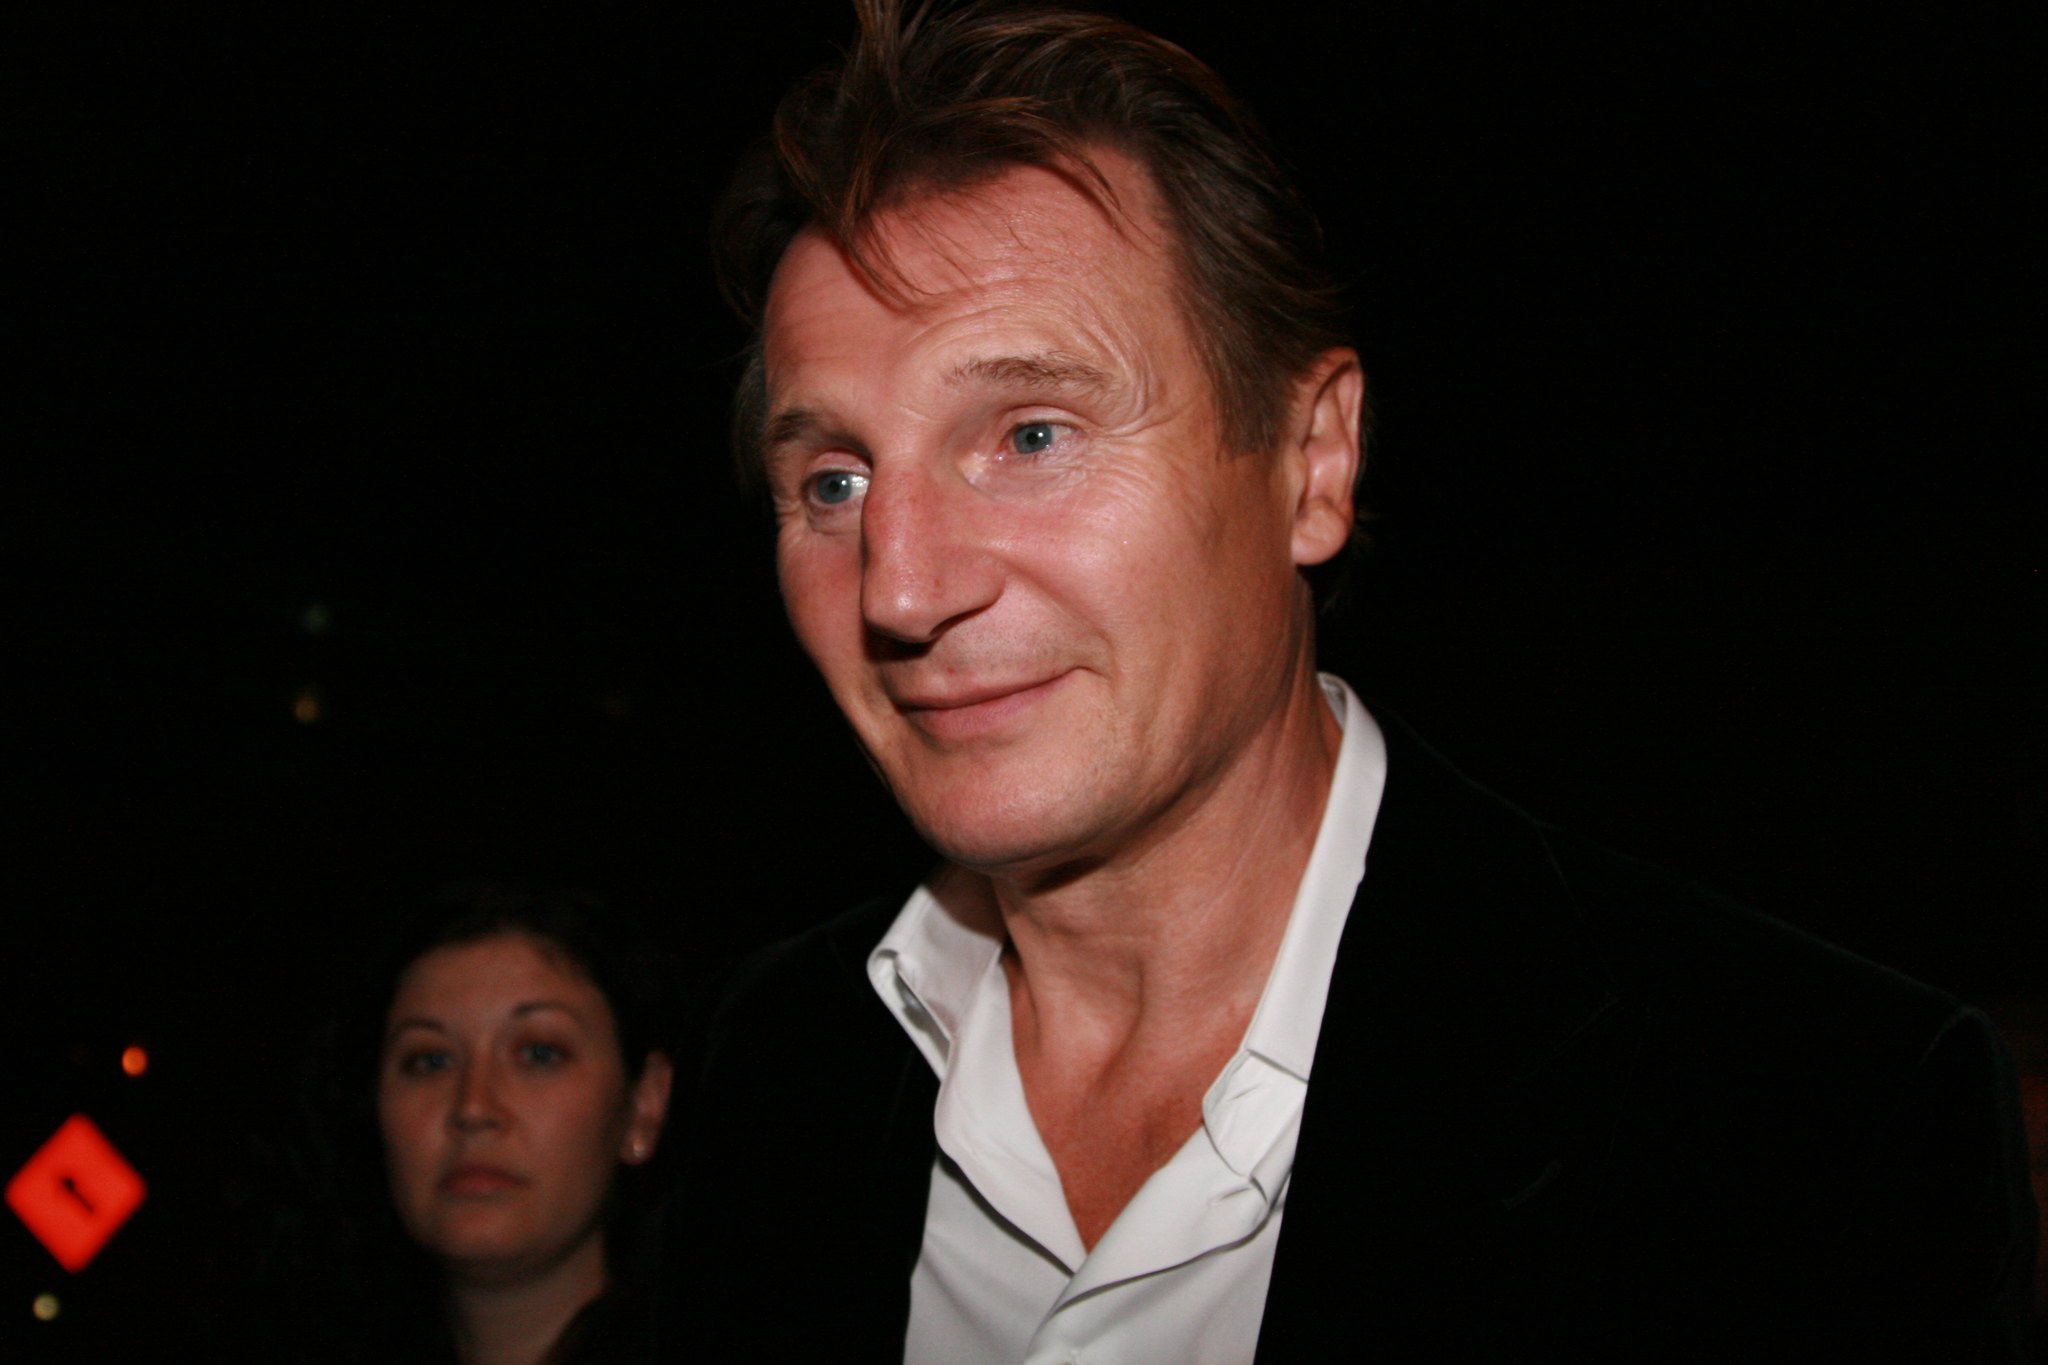 Liam Neeson at an event